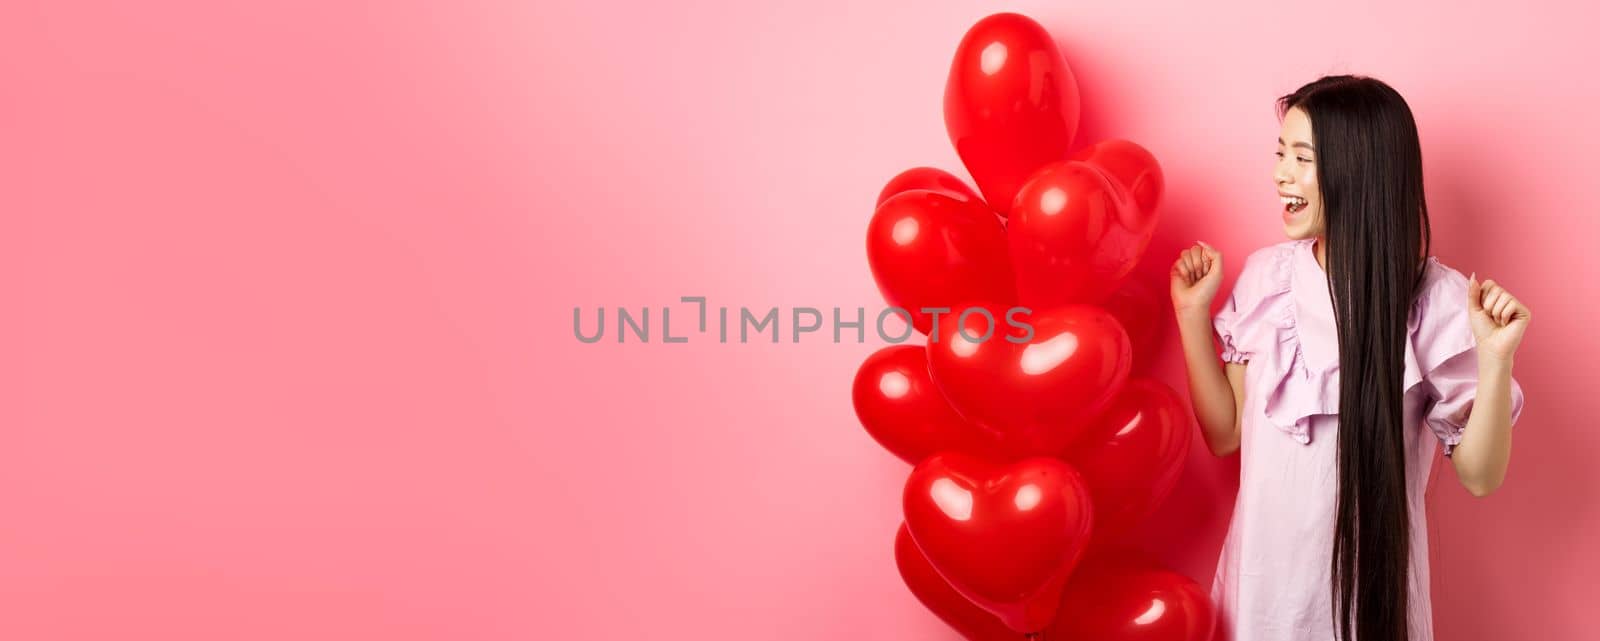 Asian teenage girl with long hair, cheering from valentines day romantic gift, looking at logo and smiling happy, jumping from joy near lovers gift heart balloons, pink background by Benzoix